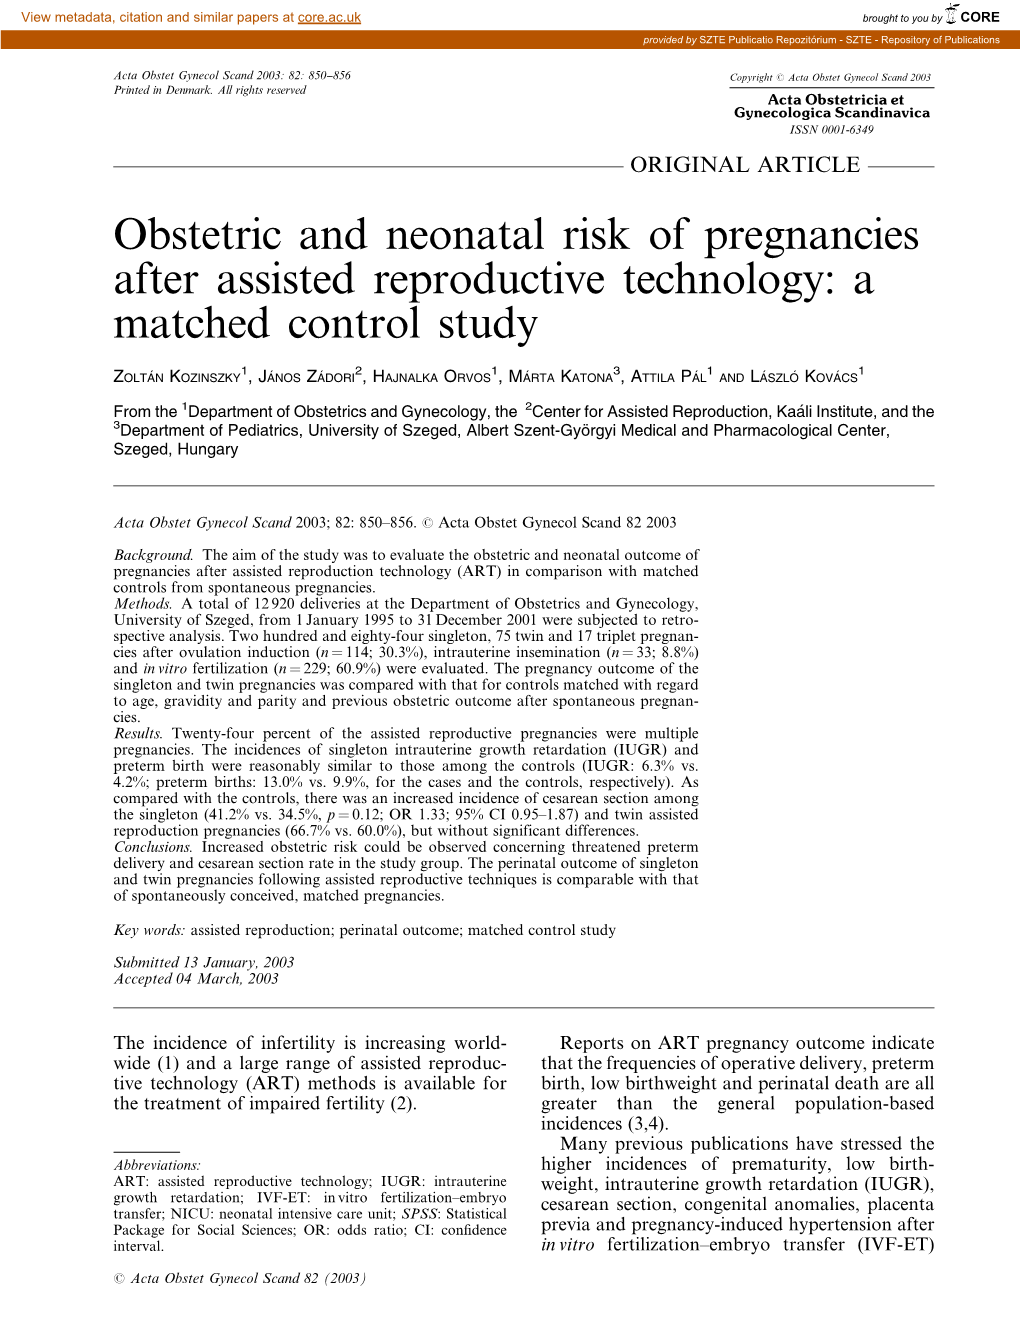 Obstetric and Neonatal Risk of Pregnancies After Assisted Reproductive Technology: a Matched Control Study